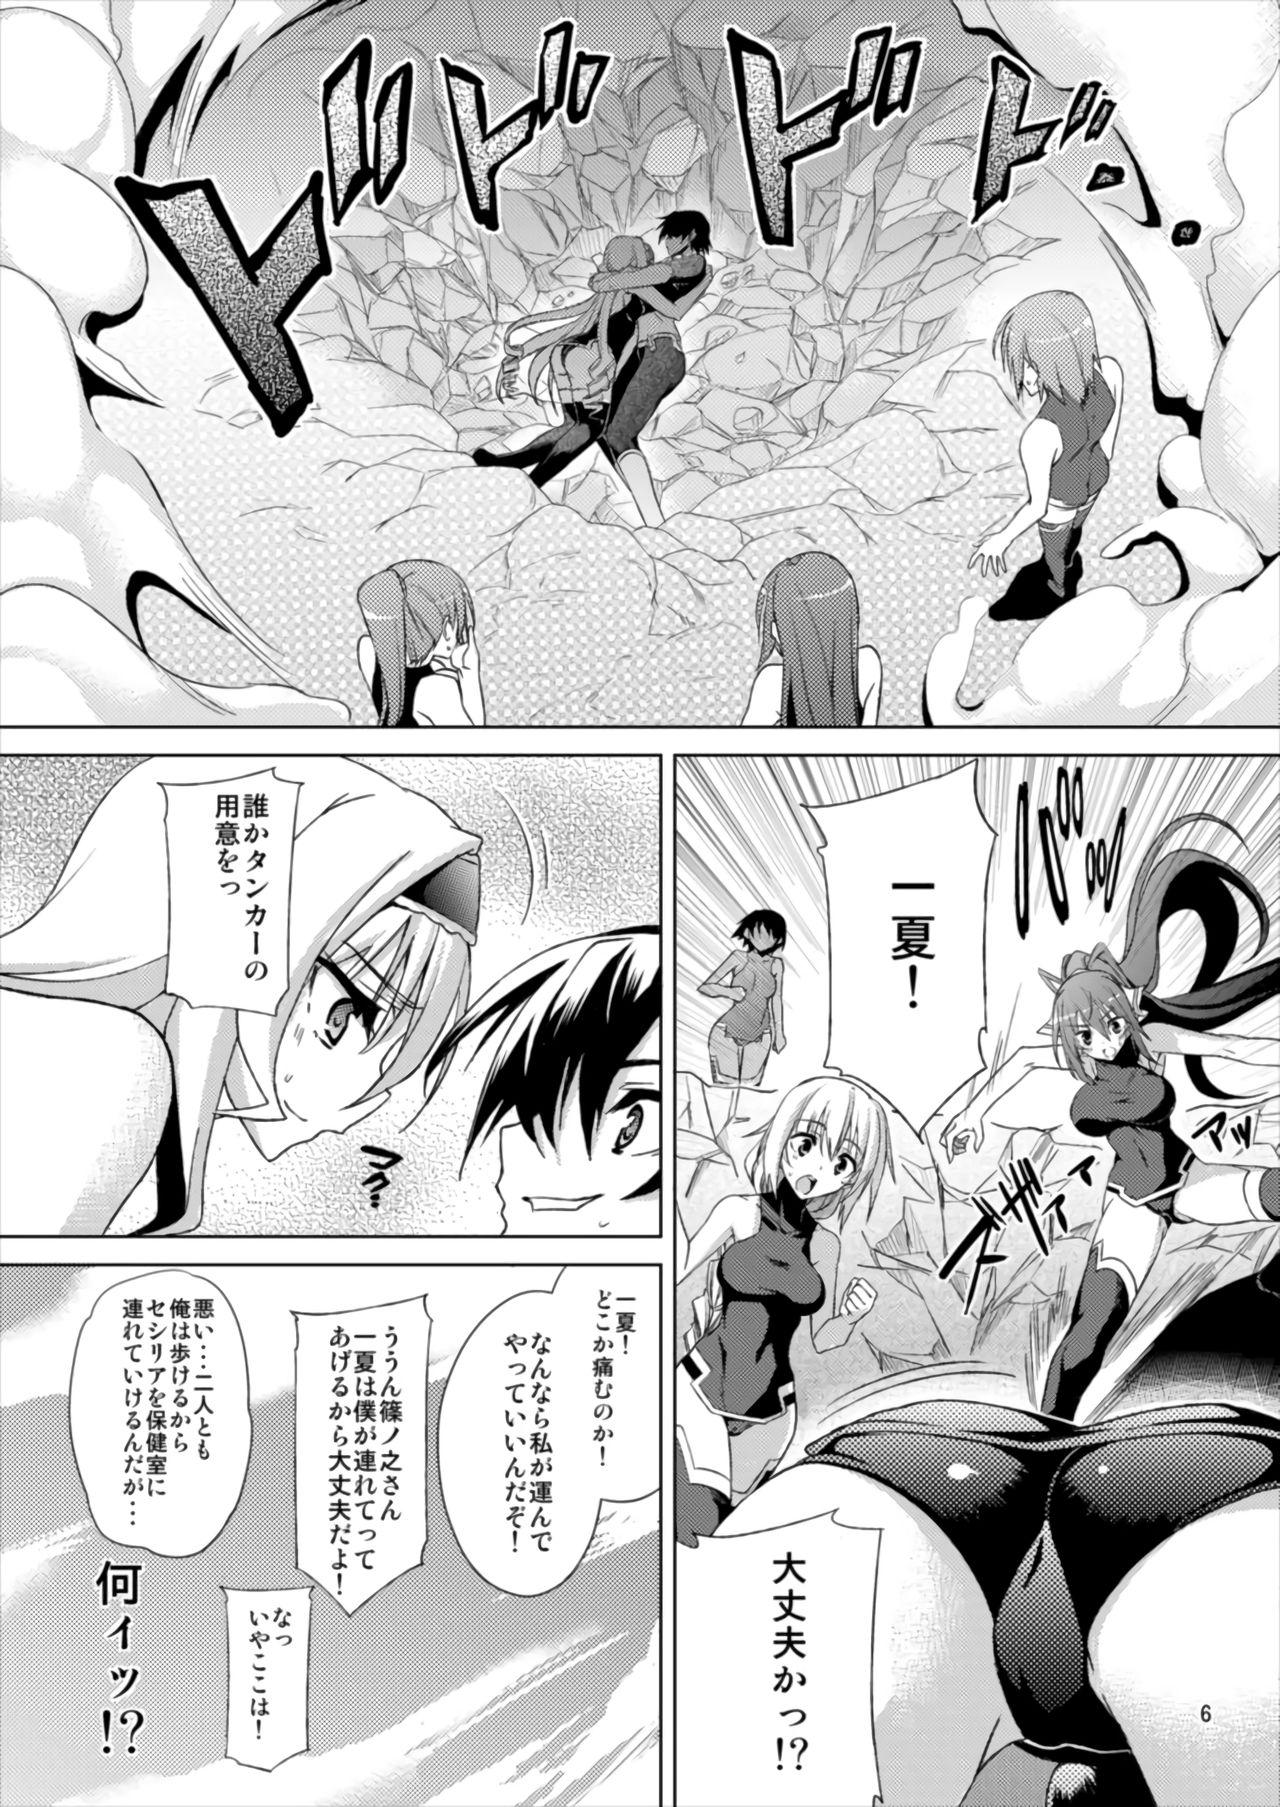 Old AFTER DREAM - Infinite stratos Hugetits - Page 6